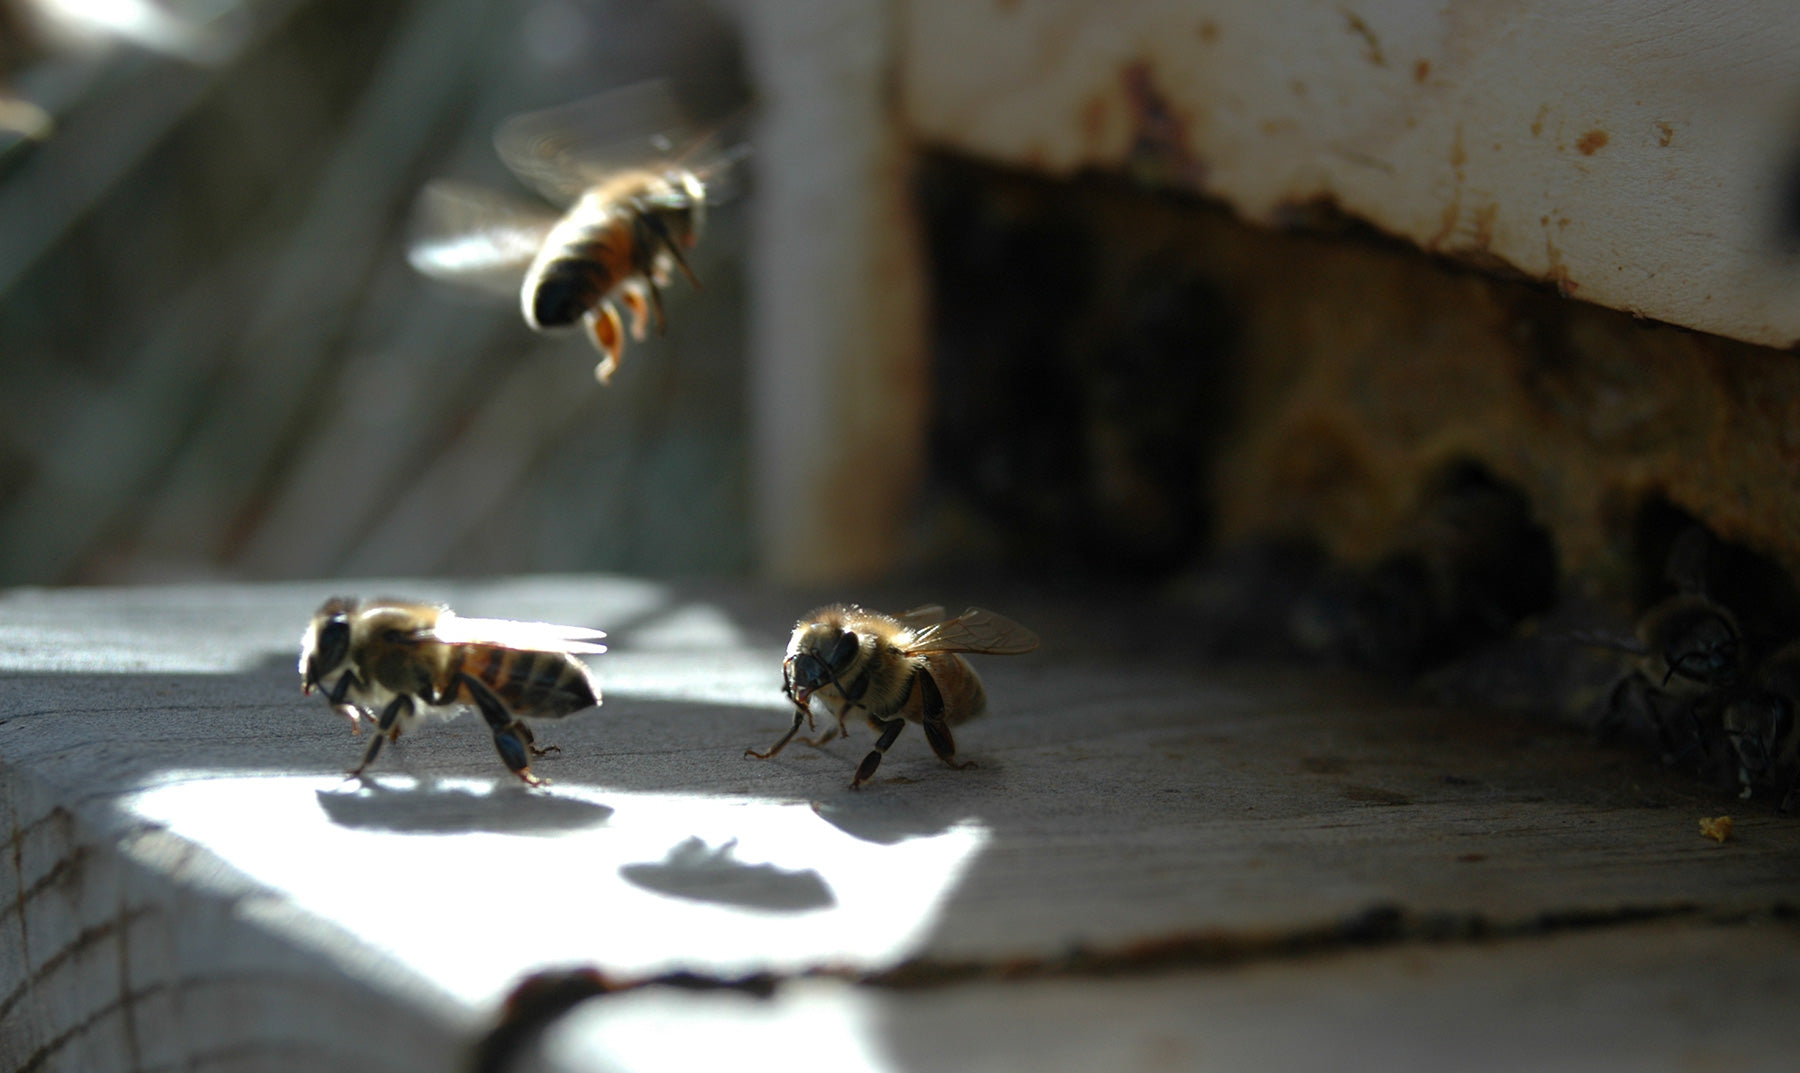 The Buzz About Bee Apitherapy